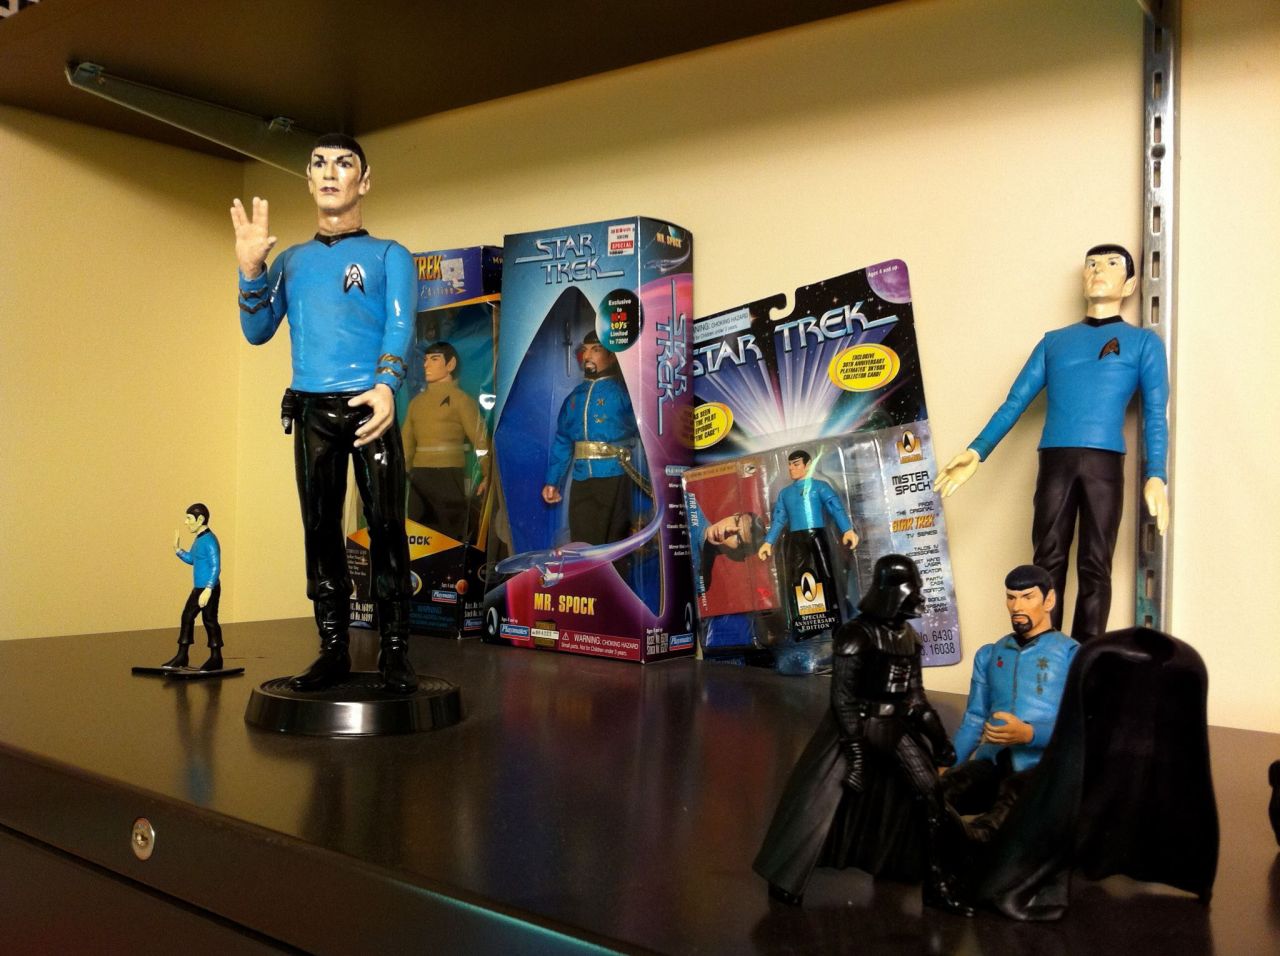 <a href="http://ireport.cnn.com/docs/DOC-830083" target="_blank">Film professor David Tolchinsky</a> has a collection of Spock dolls that he describes as "a cheaper mid-life crisis than collecting Porsches".